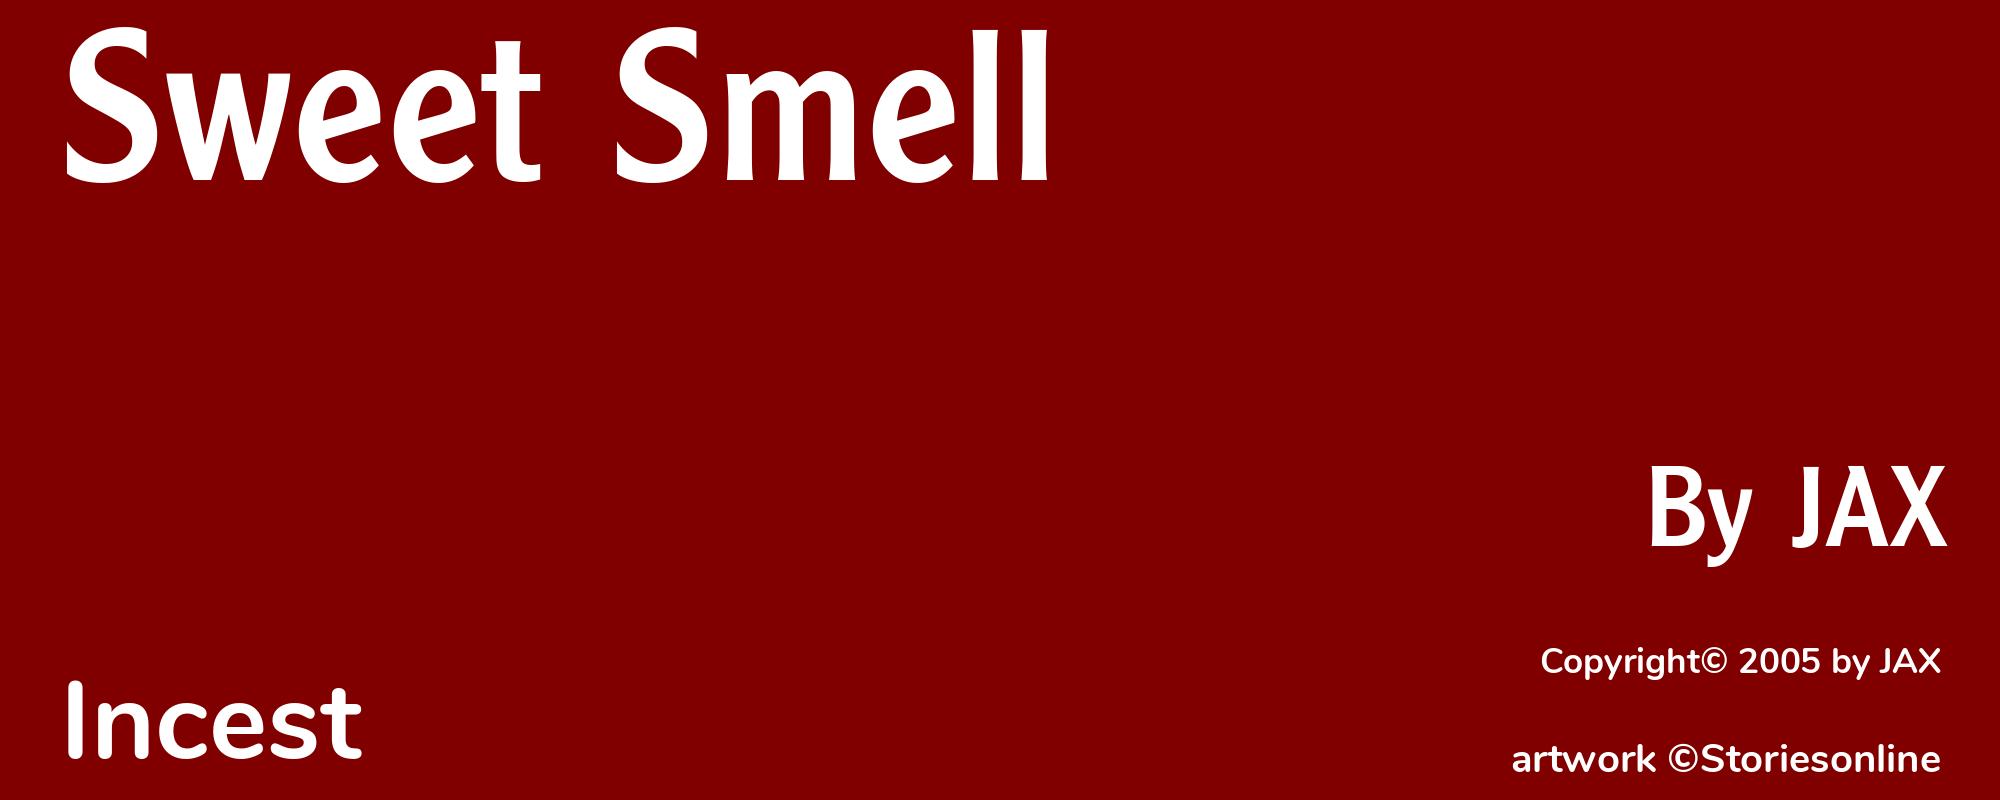 Sweet Smell - Cover